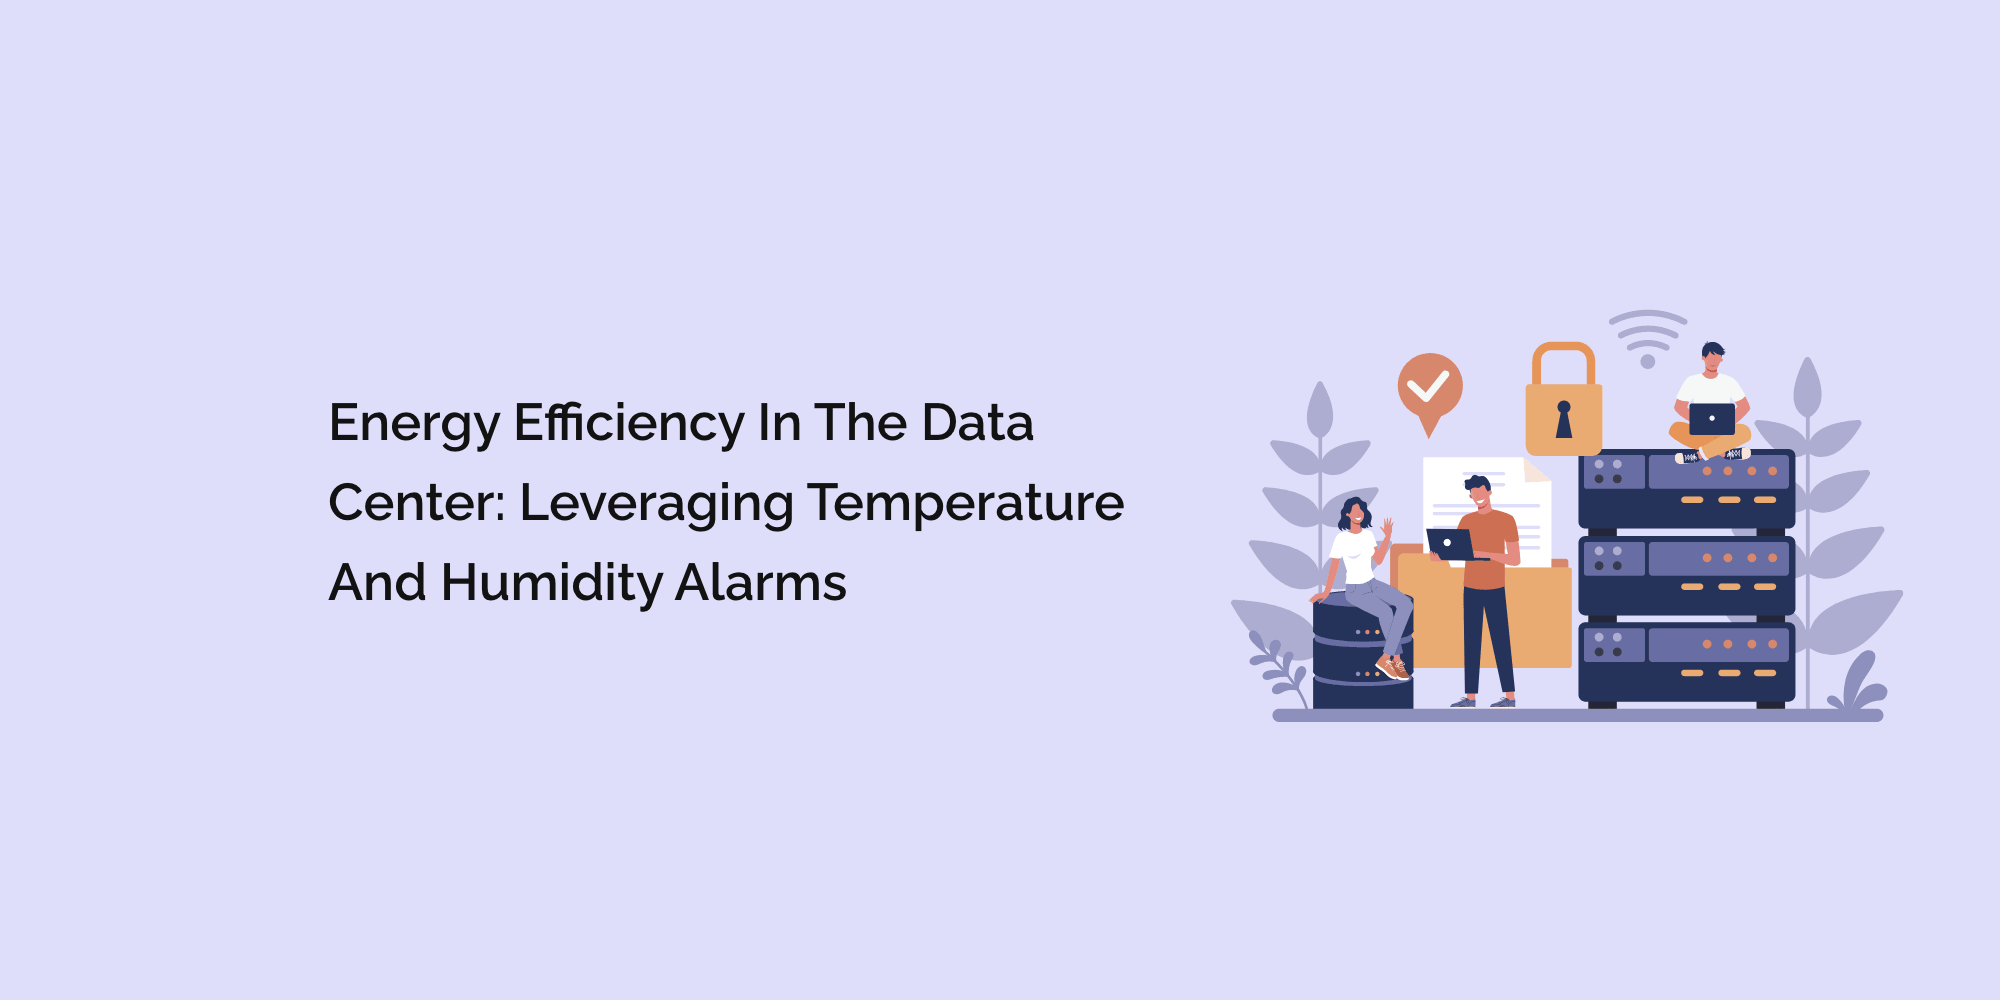 Energy Efficiency in the Data Center: Leveraging Temperature and Humidity Alarms